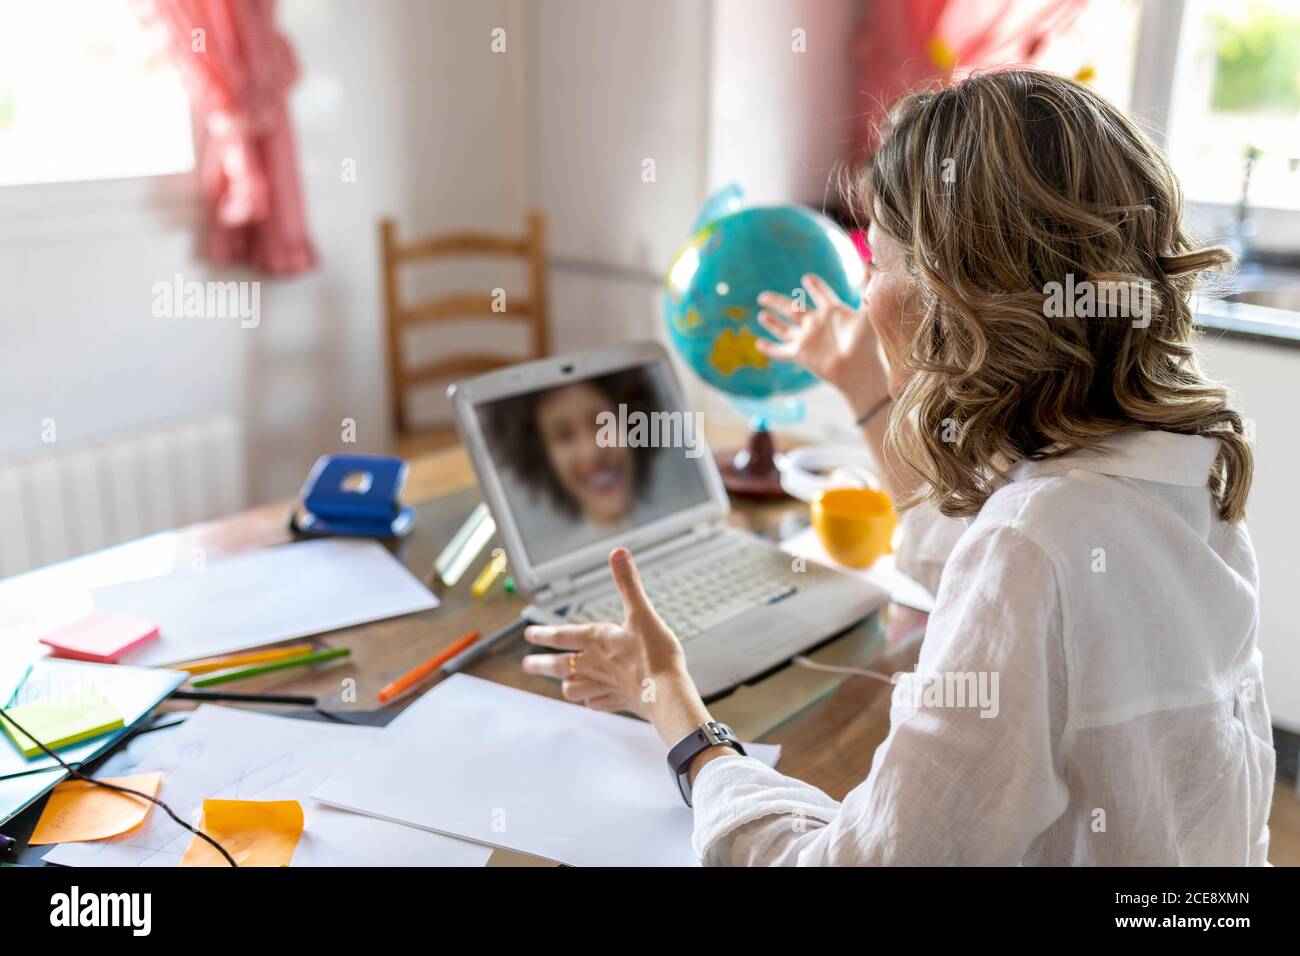 From above side view of anonymous female speaking with friend while having video chat on netbook and sitting with hands apart at table with stickers and colorful stationery in flat Stock Photo